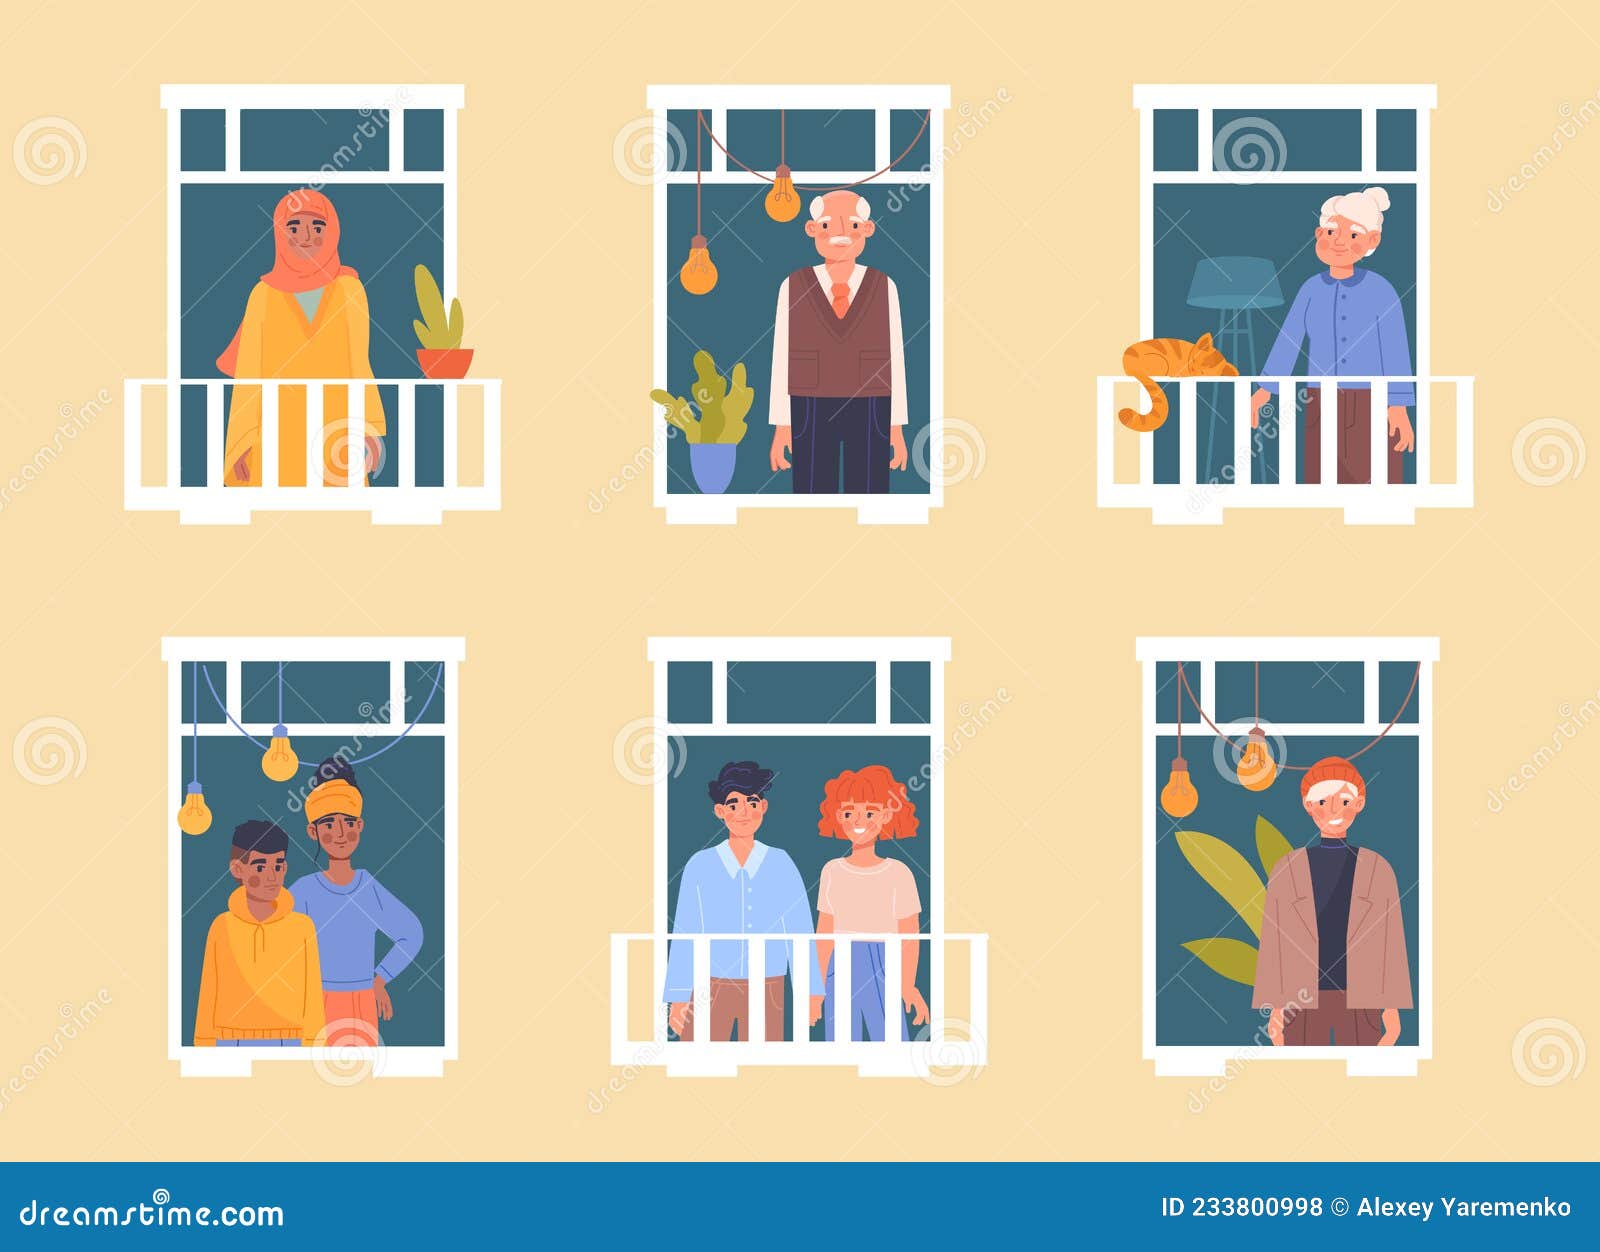 Types of people stock vector. Illustration of indoor - 233800998